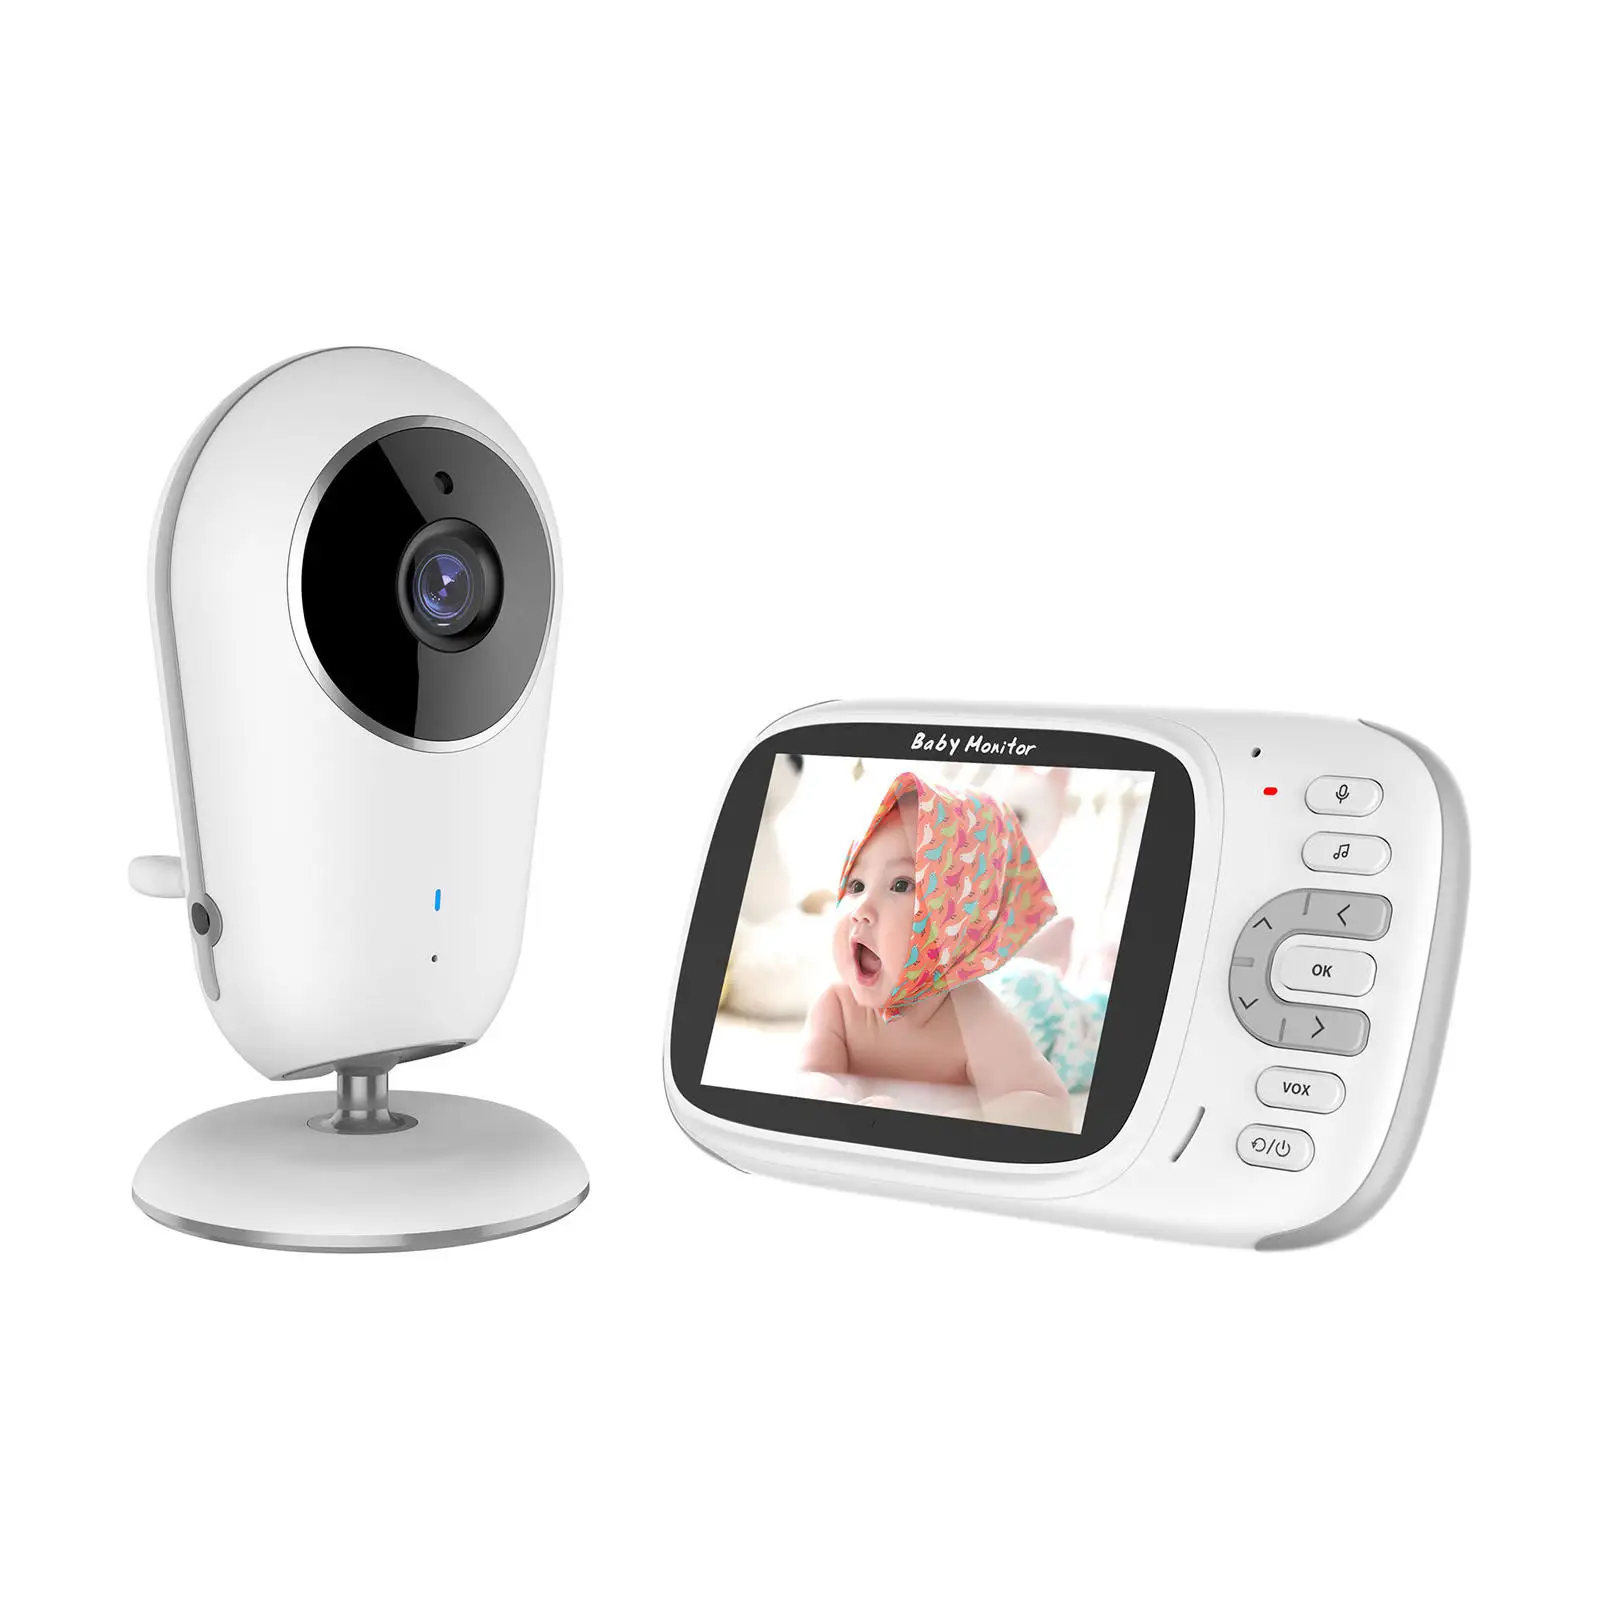 Wireless Video Baby Monitor 2-Way Talk Digital Audio Infant Baby Care Video Color Baby Security Nanny Camera 3.2inch Screen